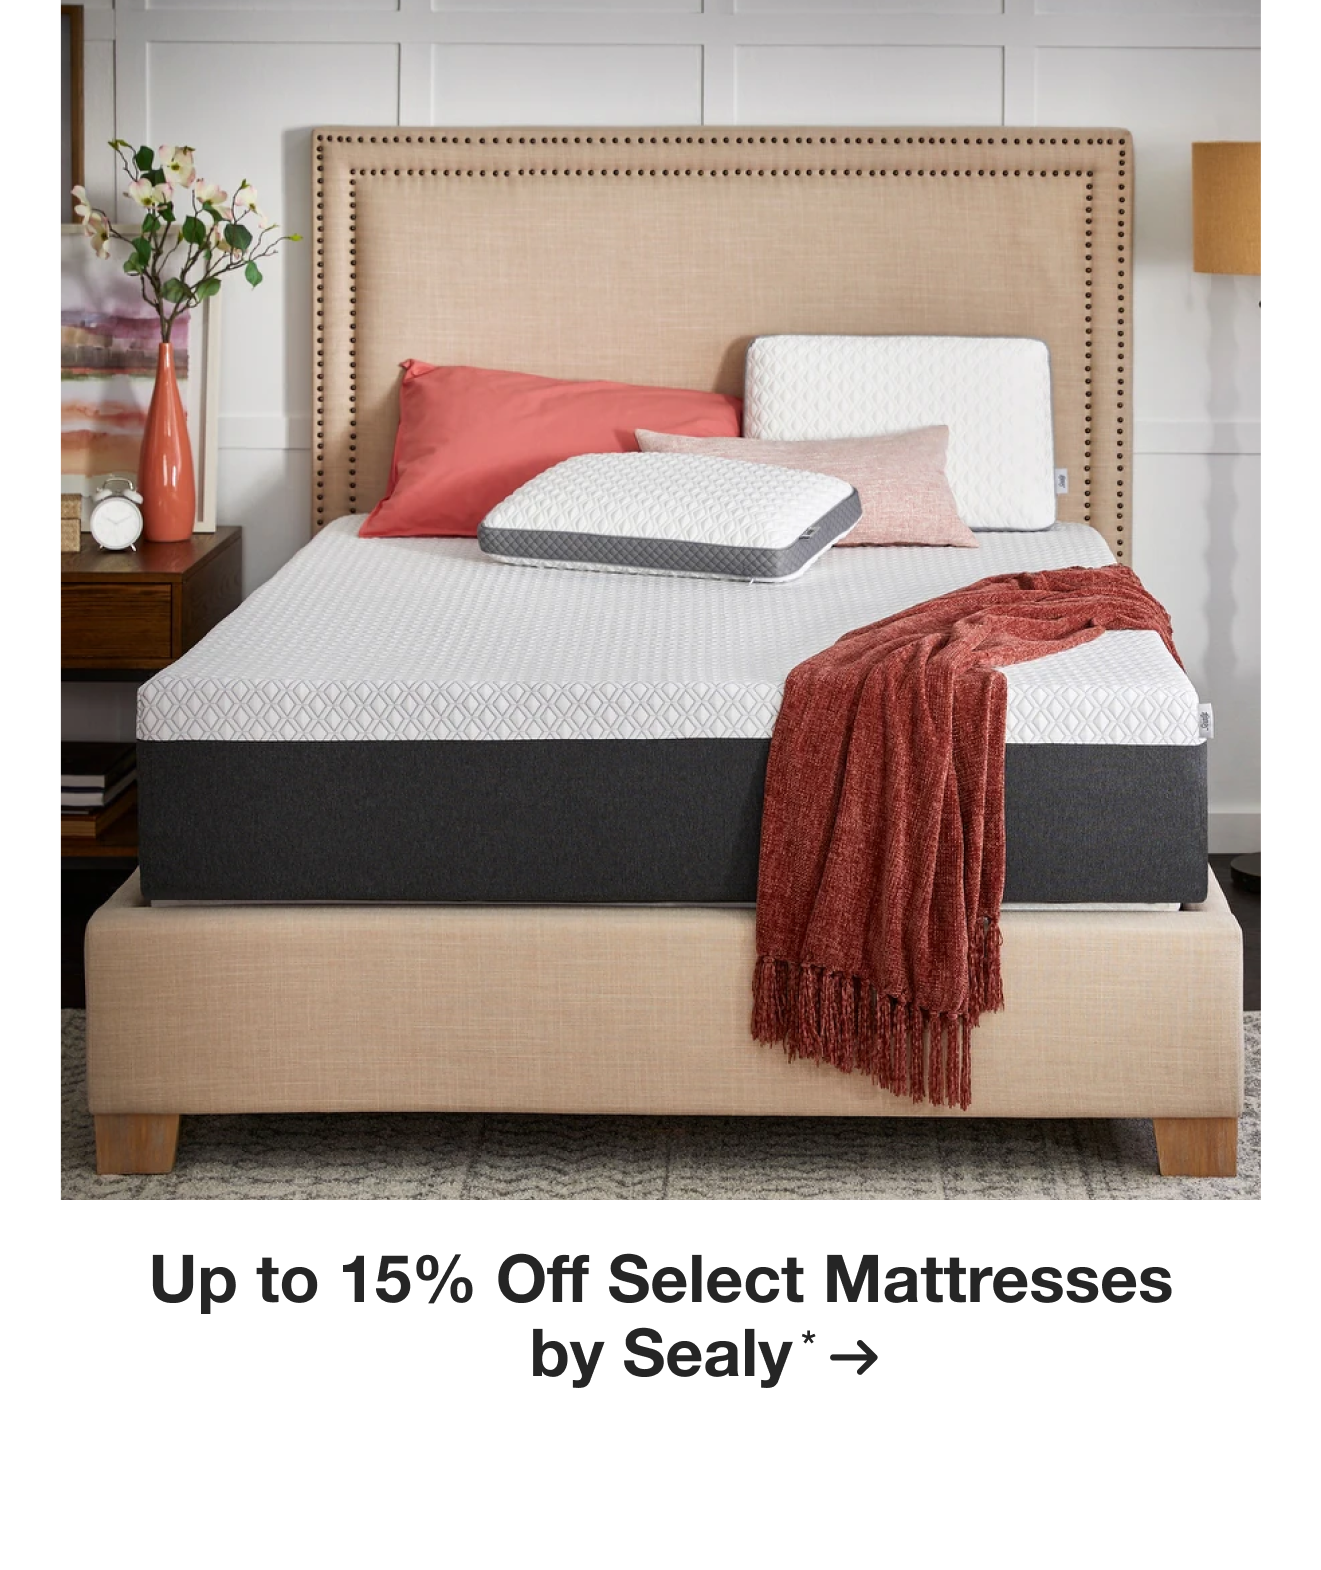 Up to 15% Off Select Mattresses by Sealy*